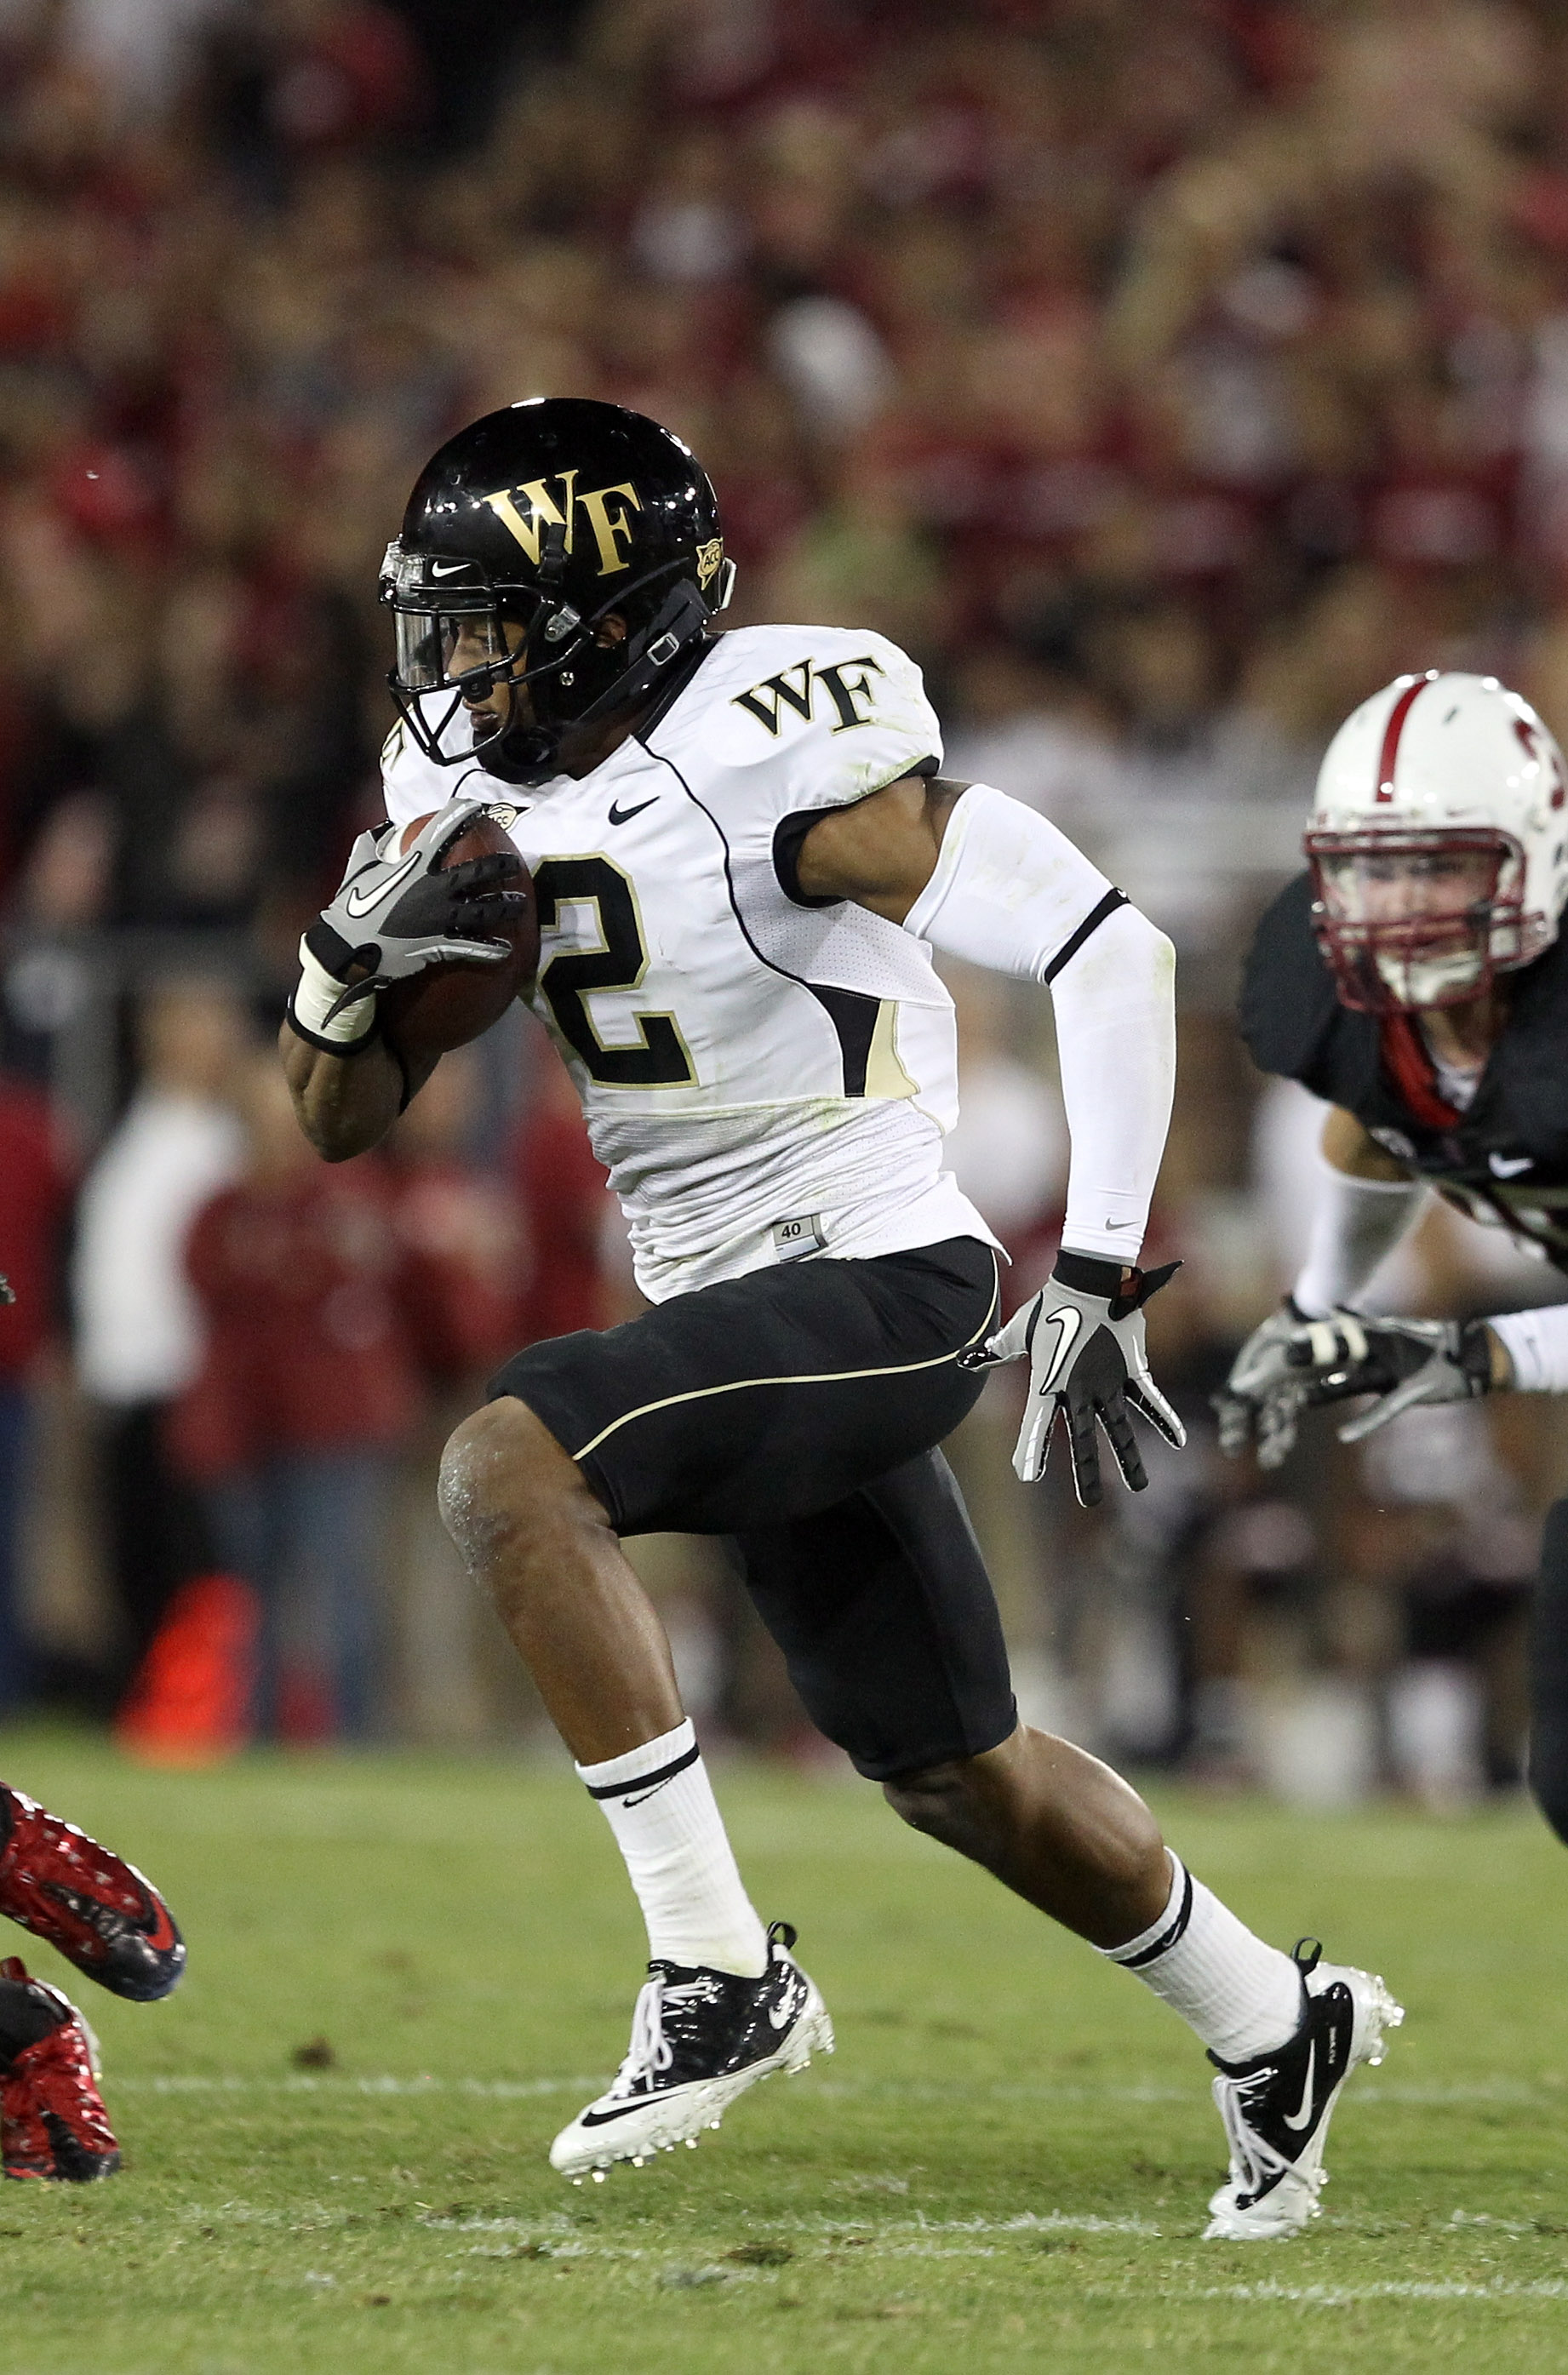 PALO ALTO, CA - SEPTEMBER 18:  Chris Givens #2 of the Wake Forest Demon Deacons in action against the Stanford Cardinal at Stanford Stadium on September 18, 2010 in Palo Alto, California.  (Photo by Ezra Shaw/Getty Images)